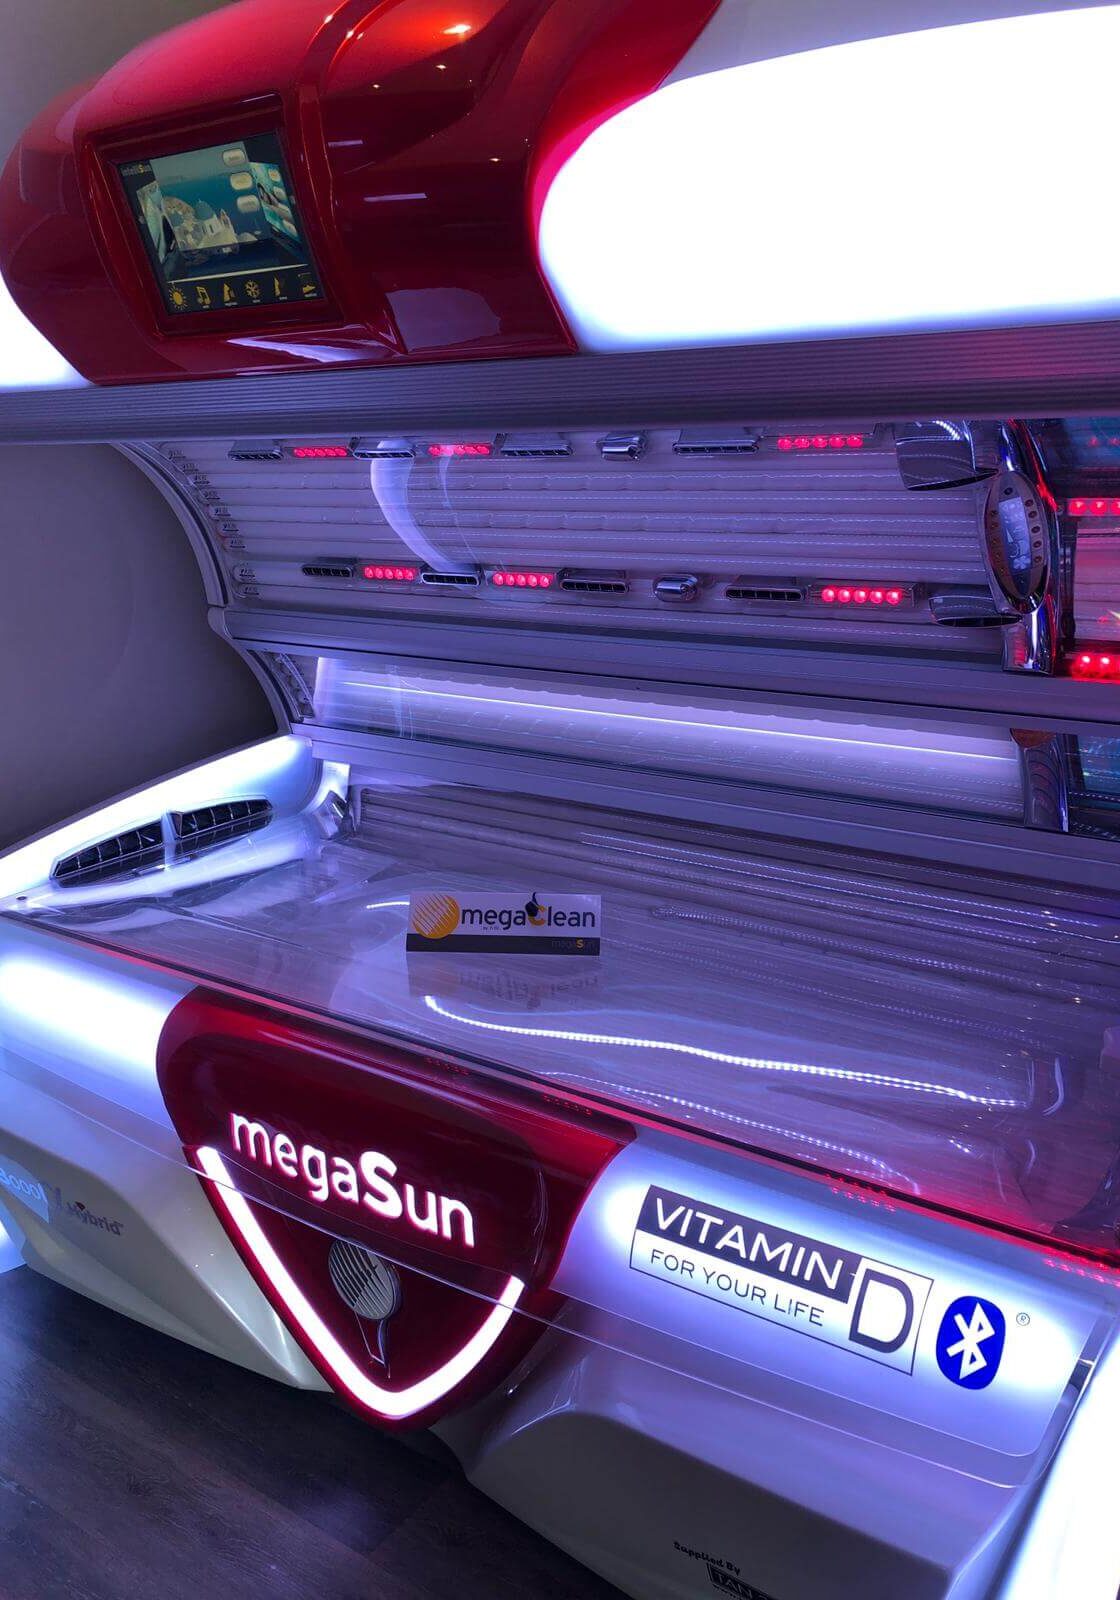 A tanning bed with the lights on and a red light.